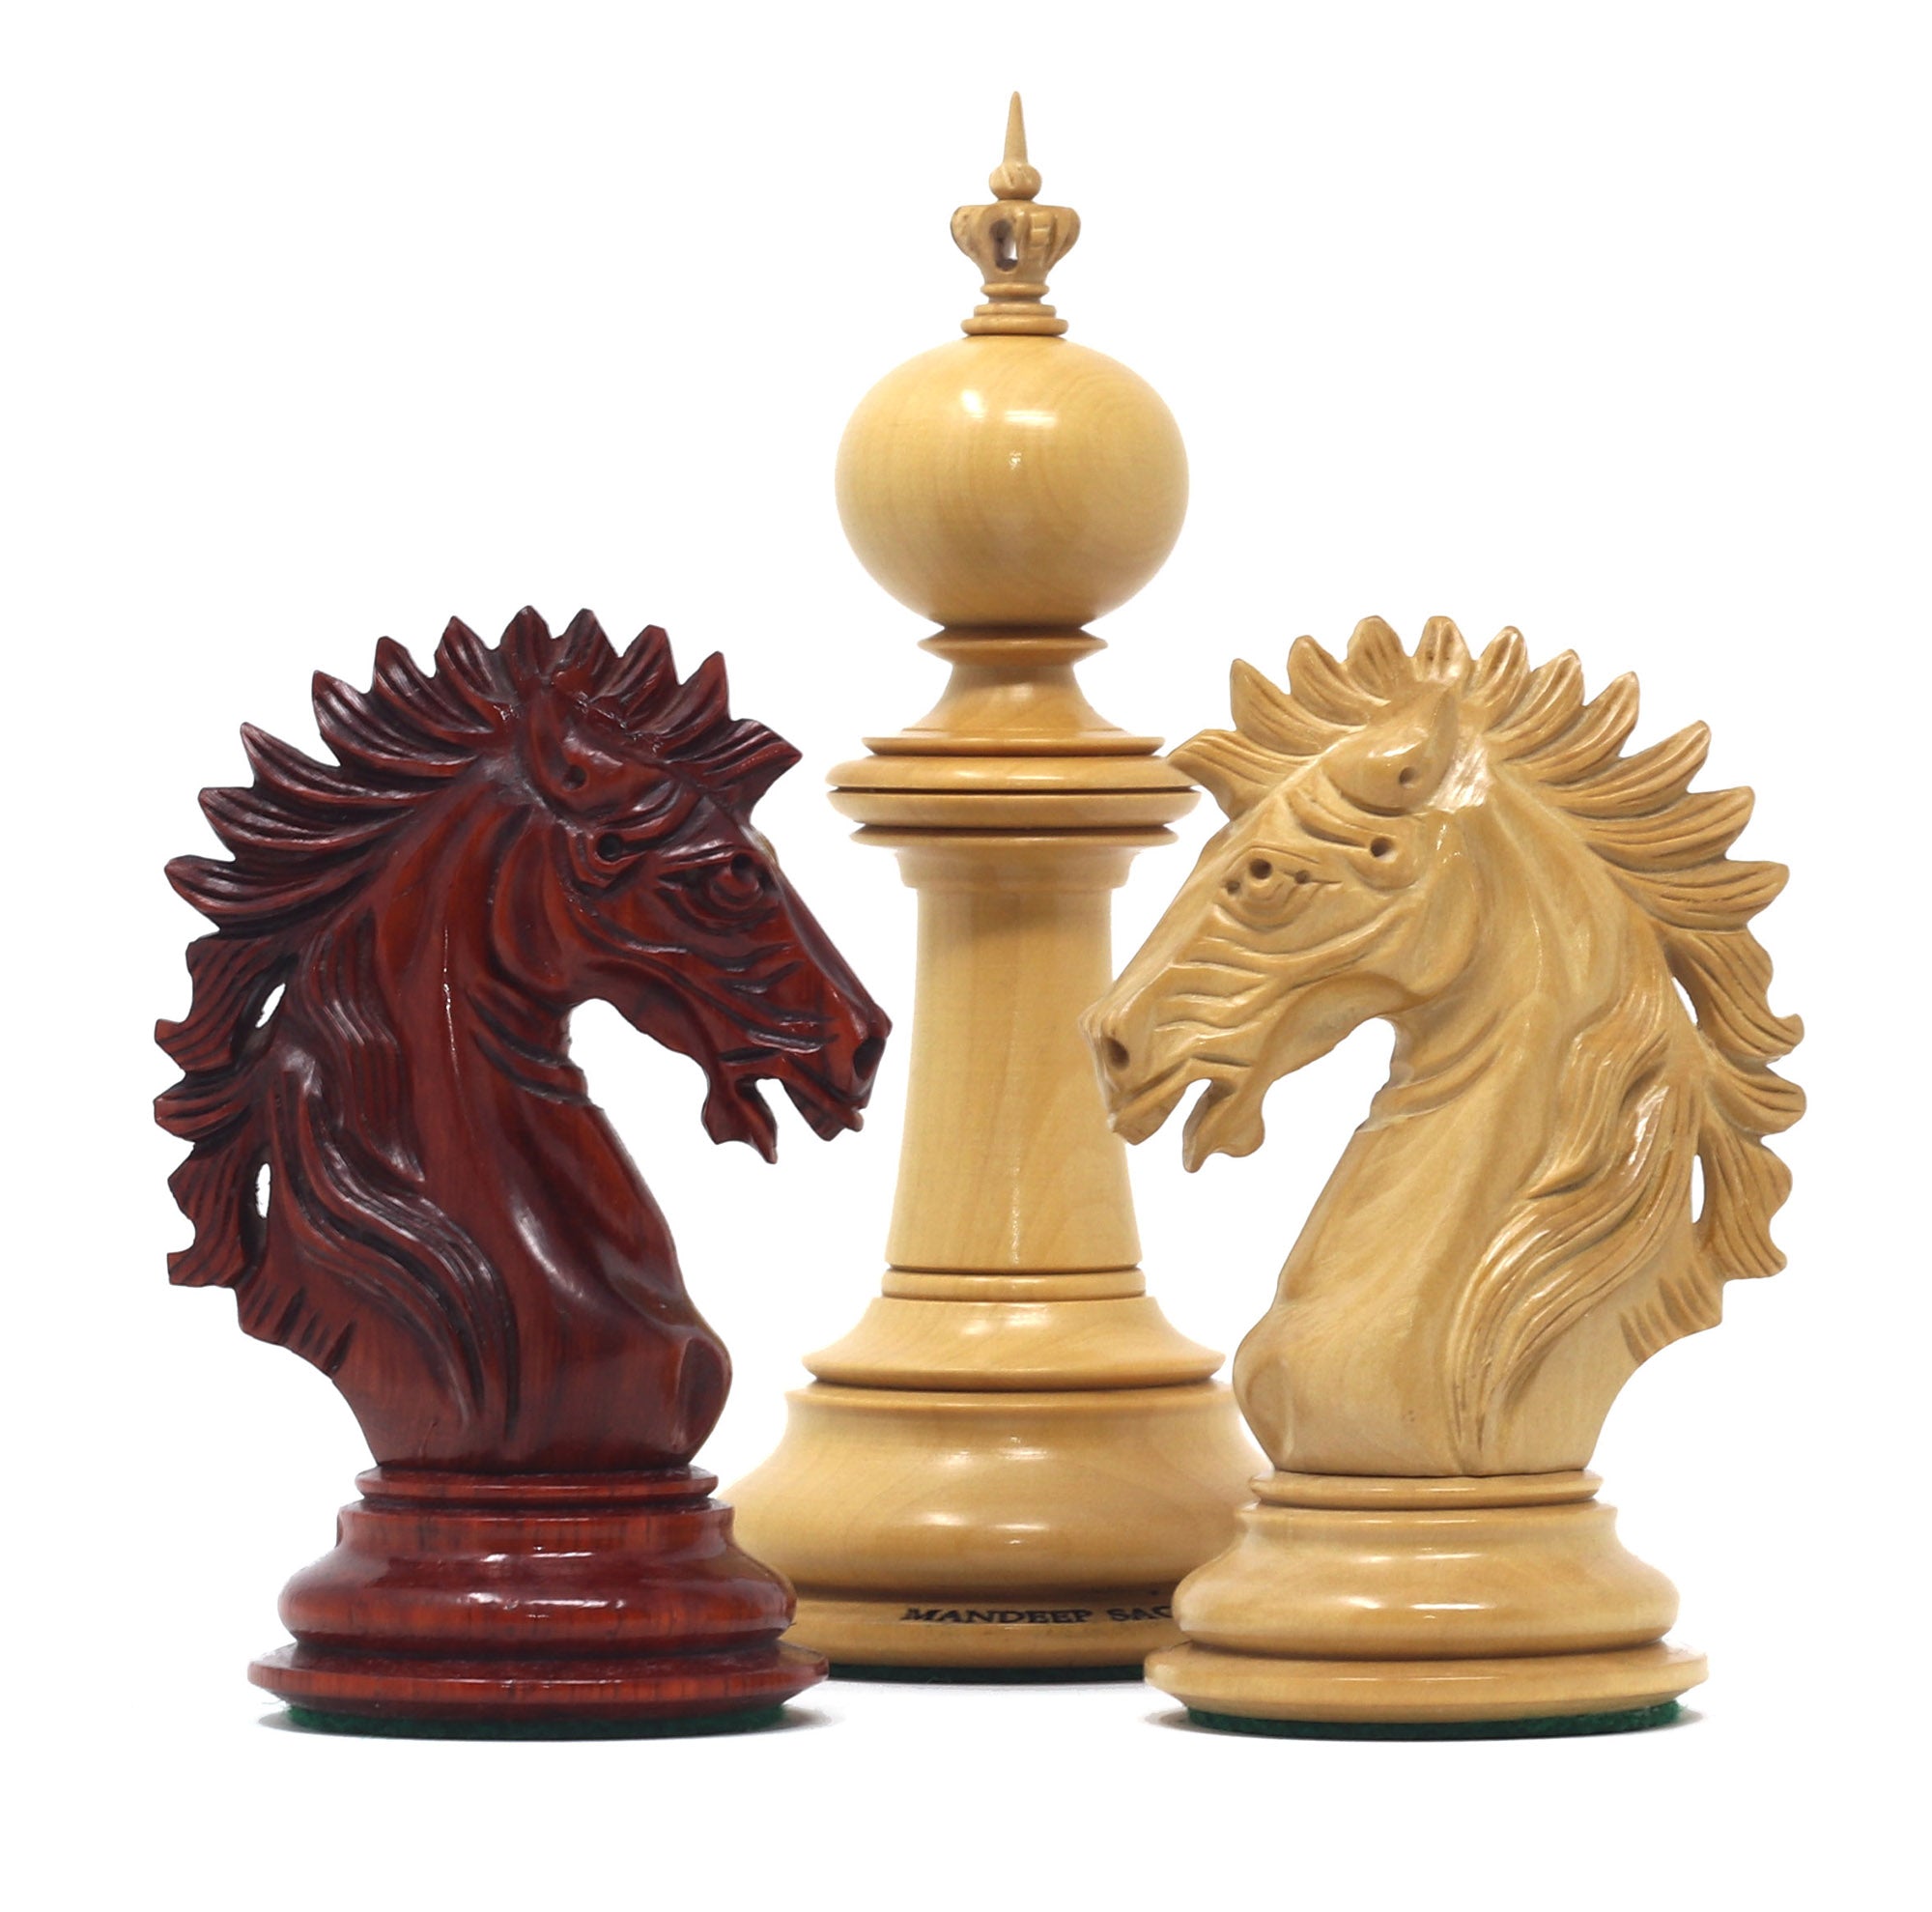 Queen – The Most Powerful Piece in Chess' Artisan Apron